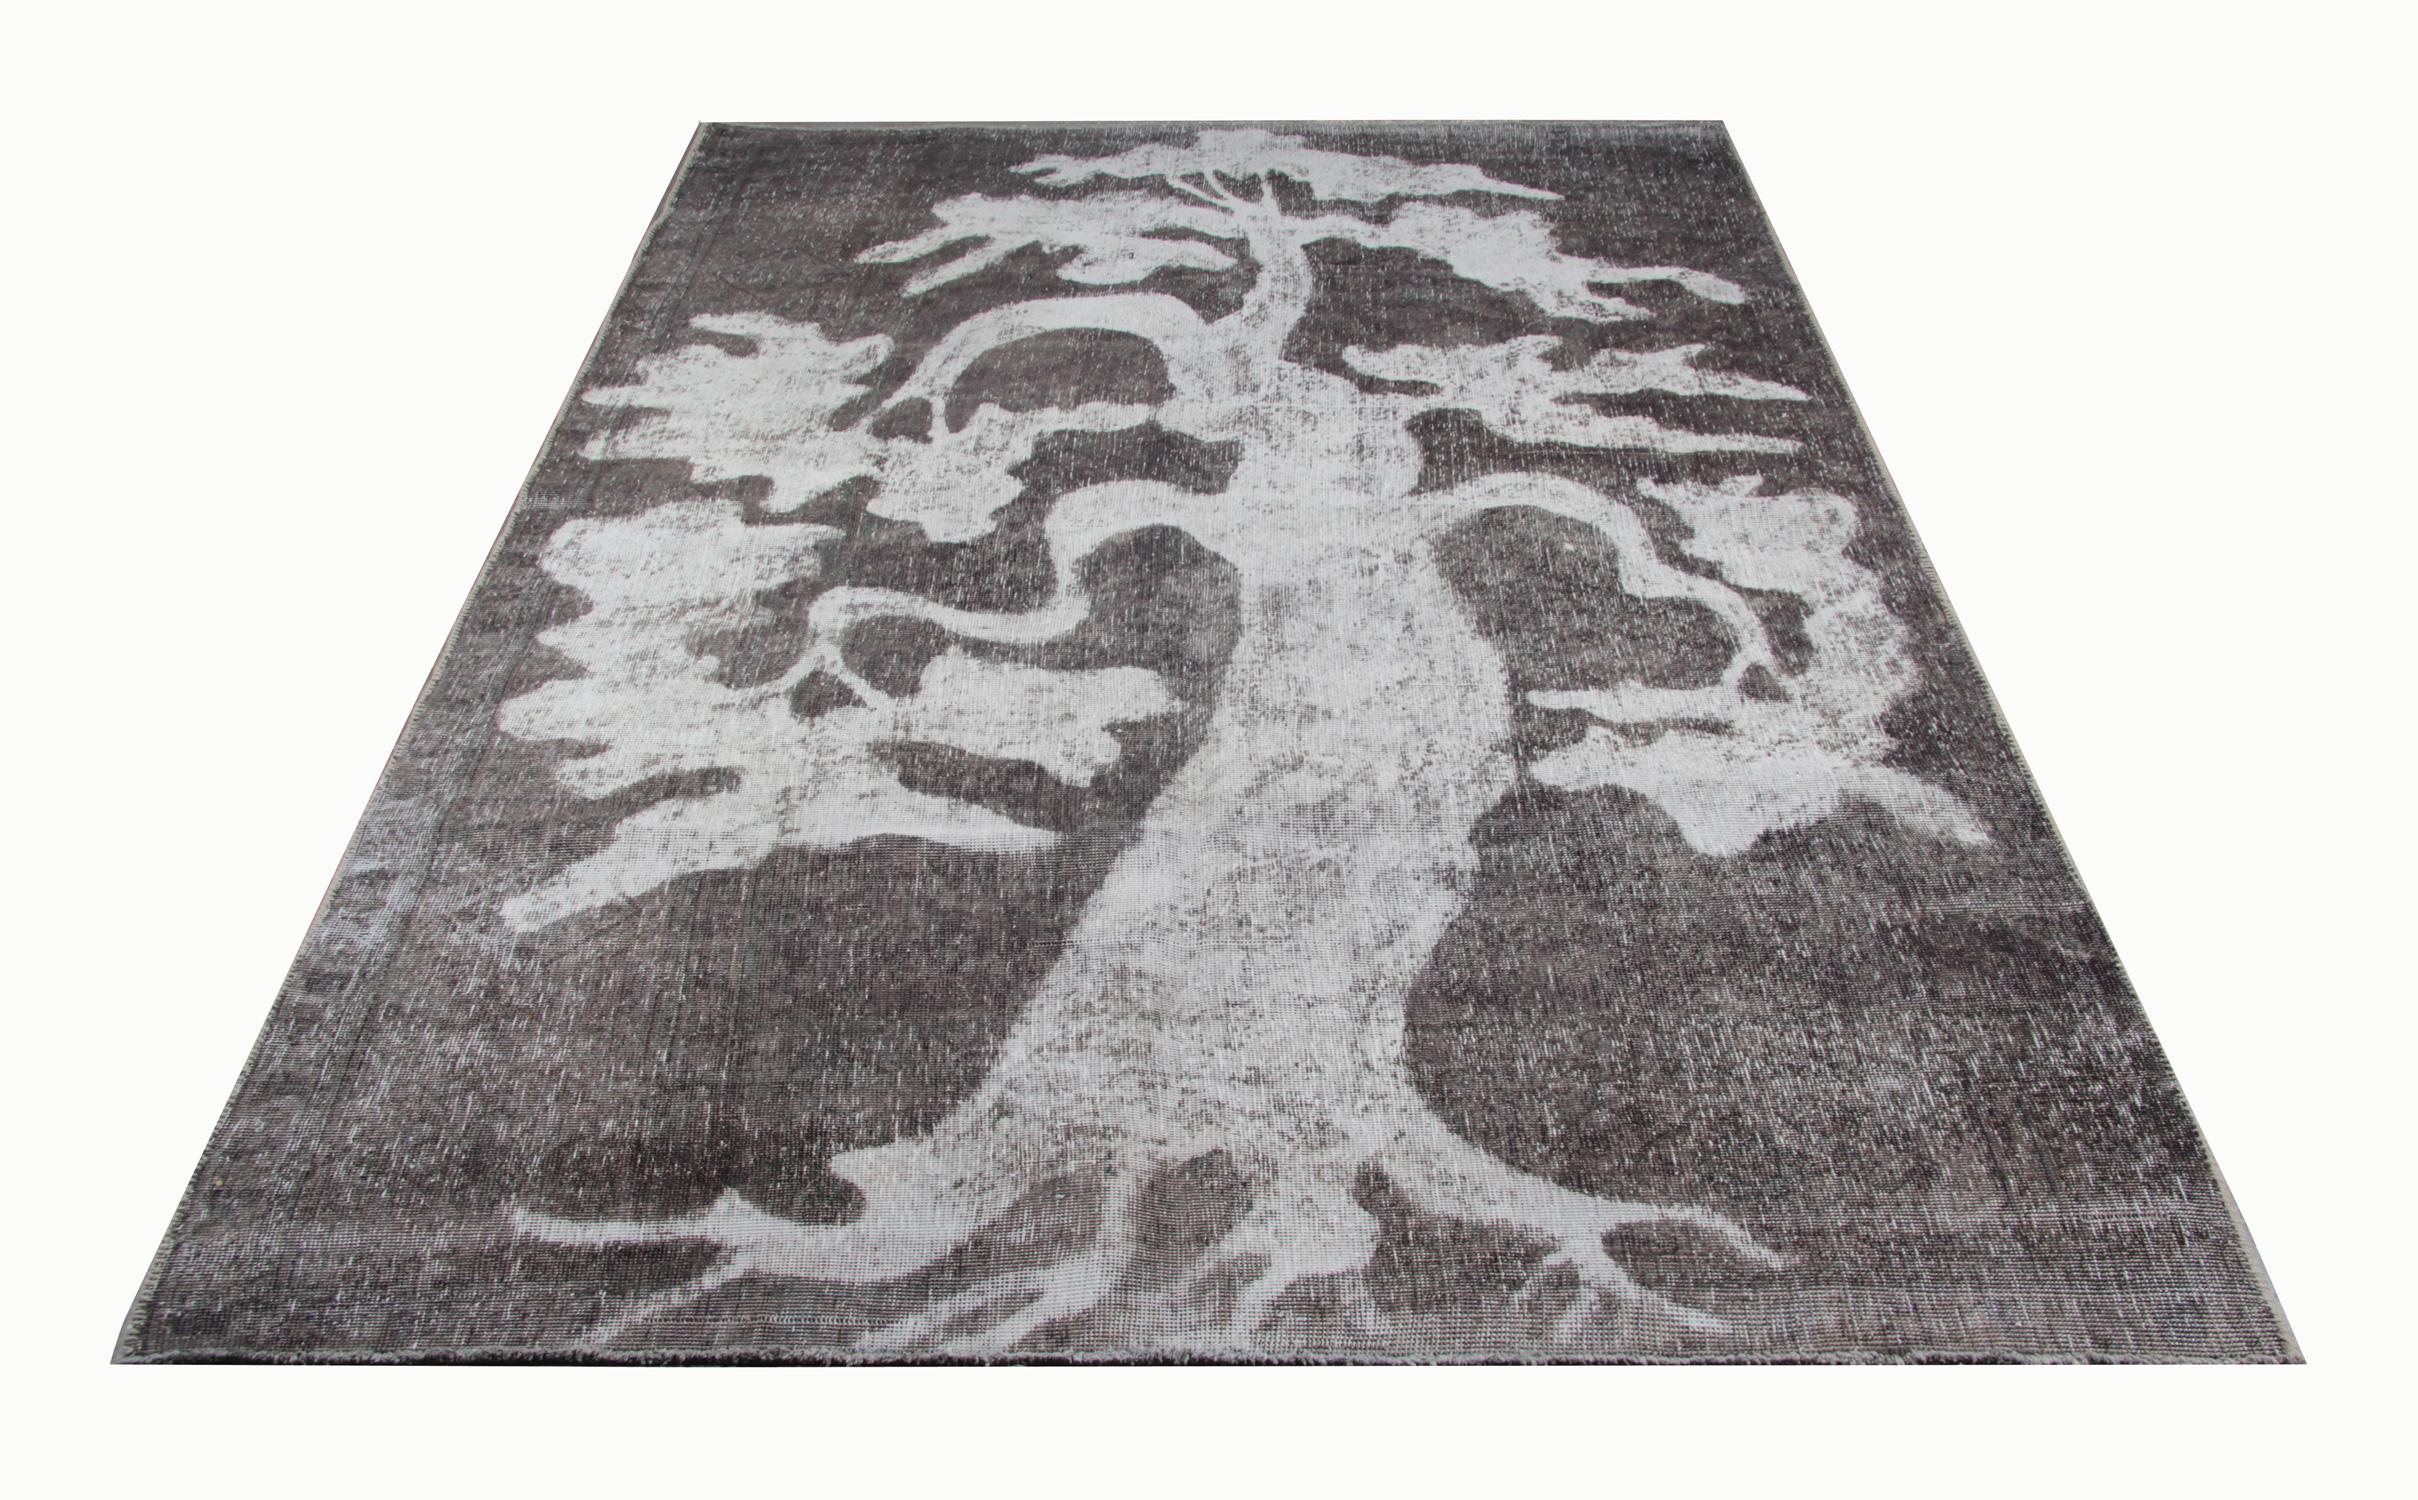 This oriental Turkish carpet is a handmade oriental rug coloured in different shades of black, white and grey. This traditional rug would be suited as a wall rug or placed on a wall as a home furnishing. This floral pattern is handmade using